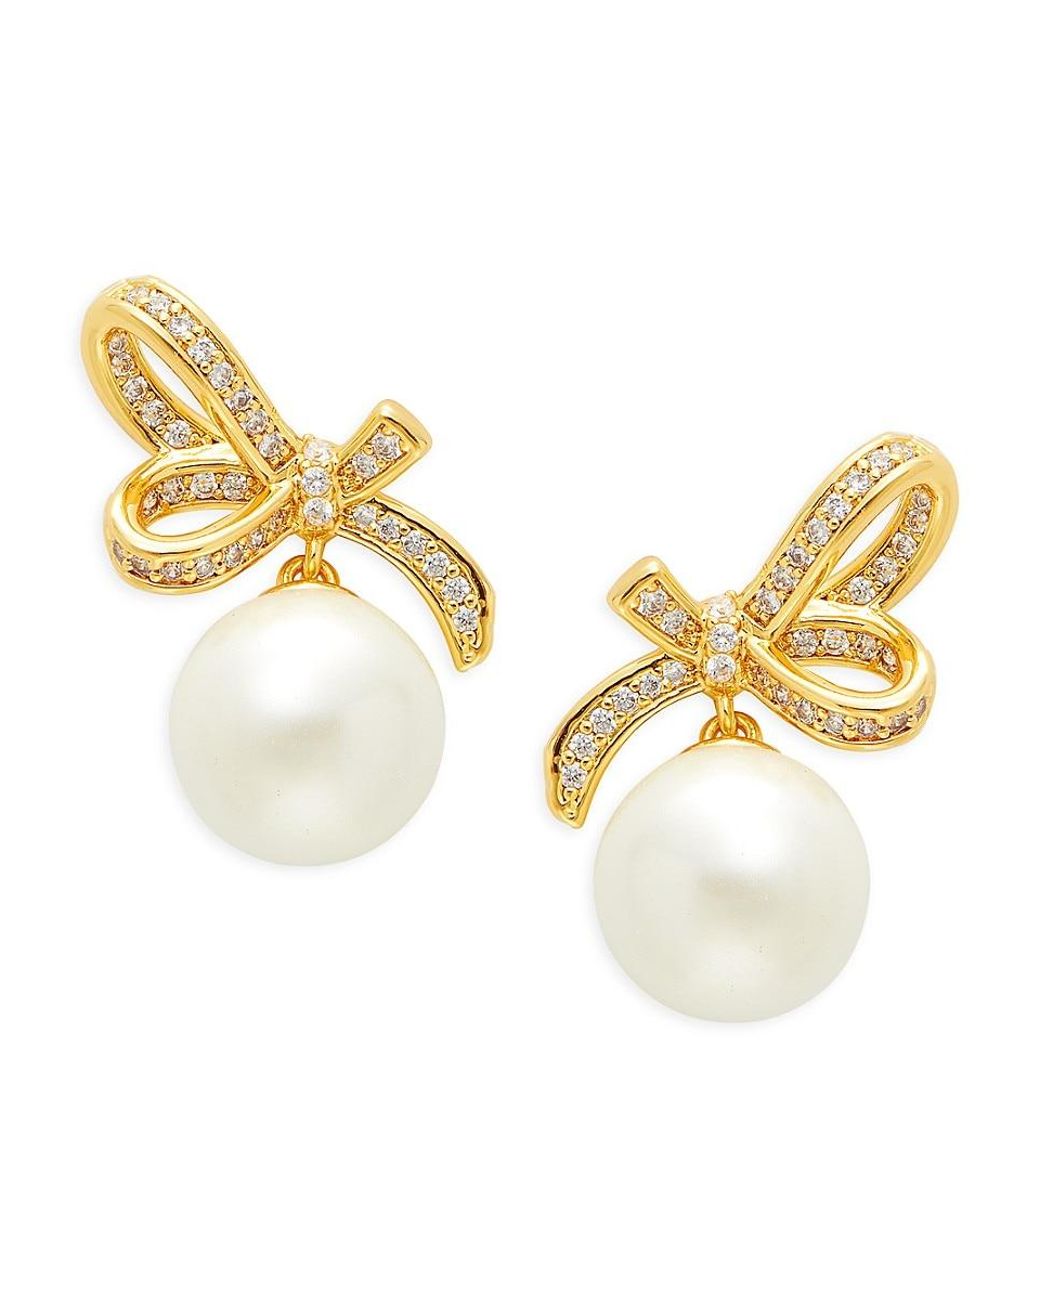 Buy SILVER PEARL AND GOLD DROP EARRINGS Online  Unniyarcha